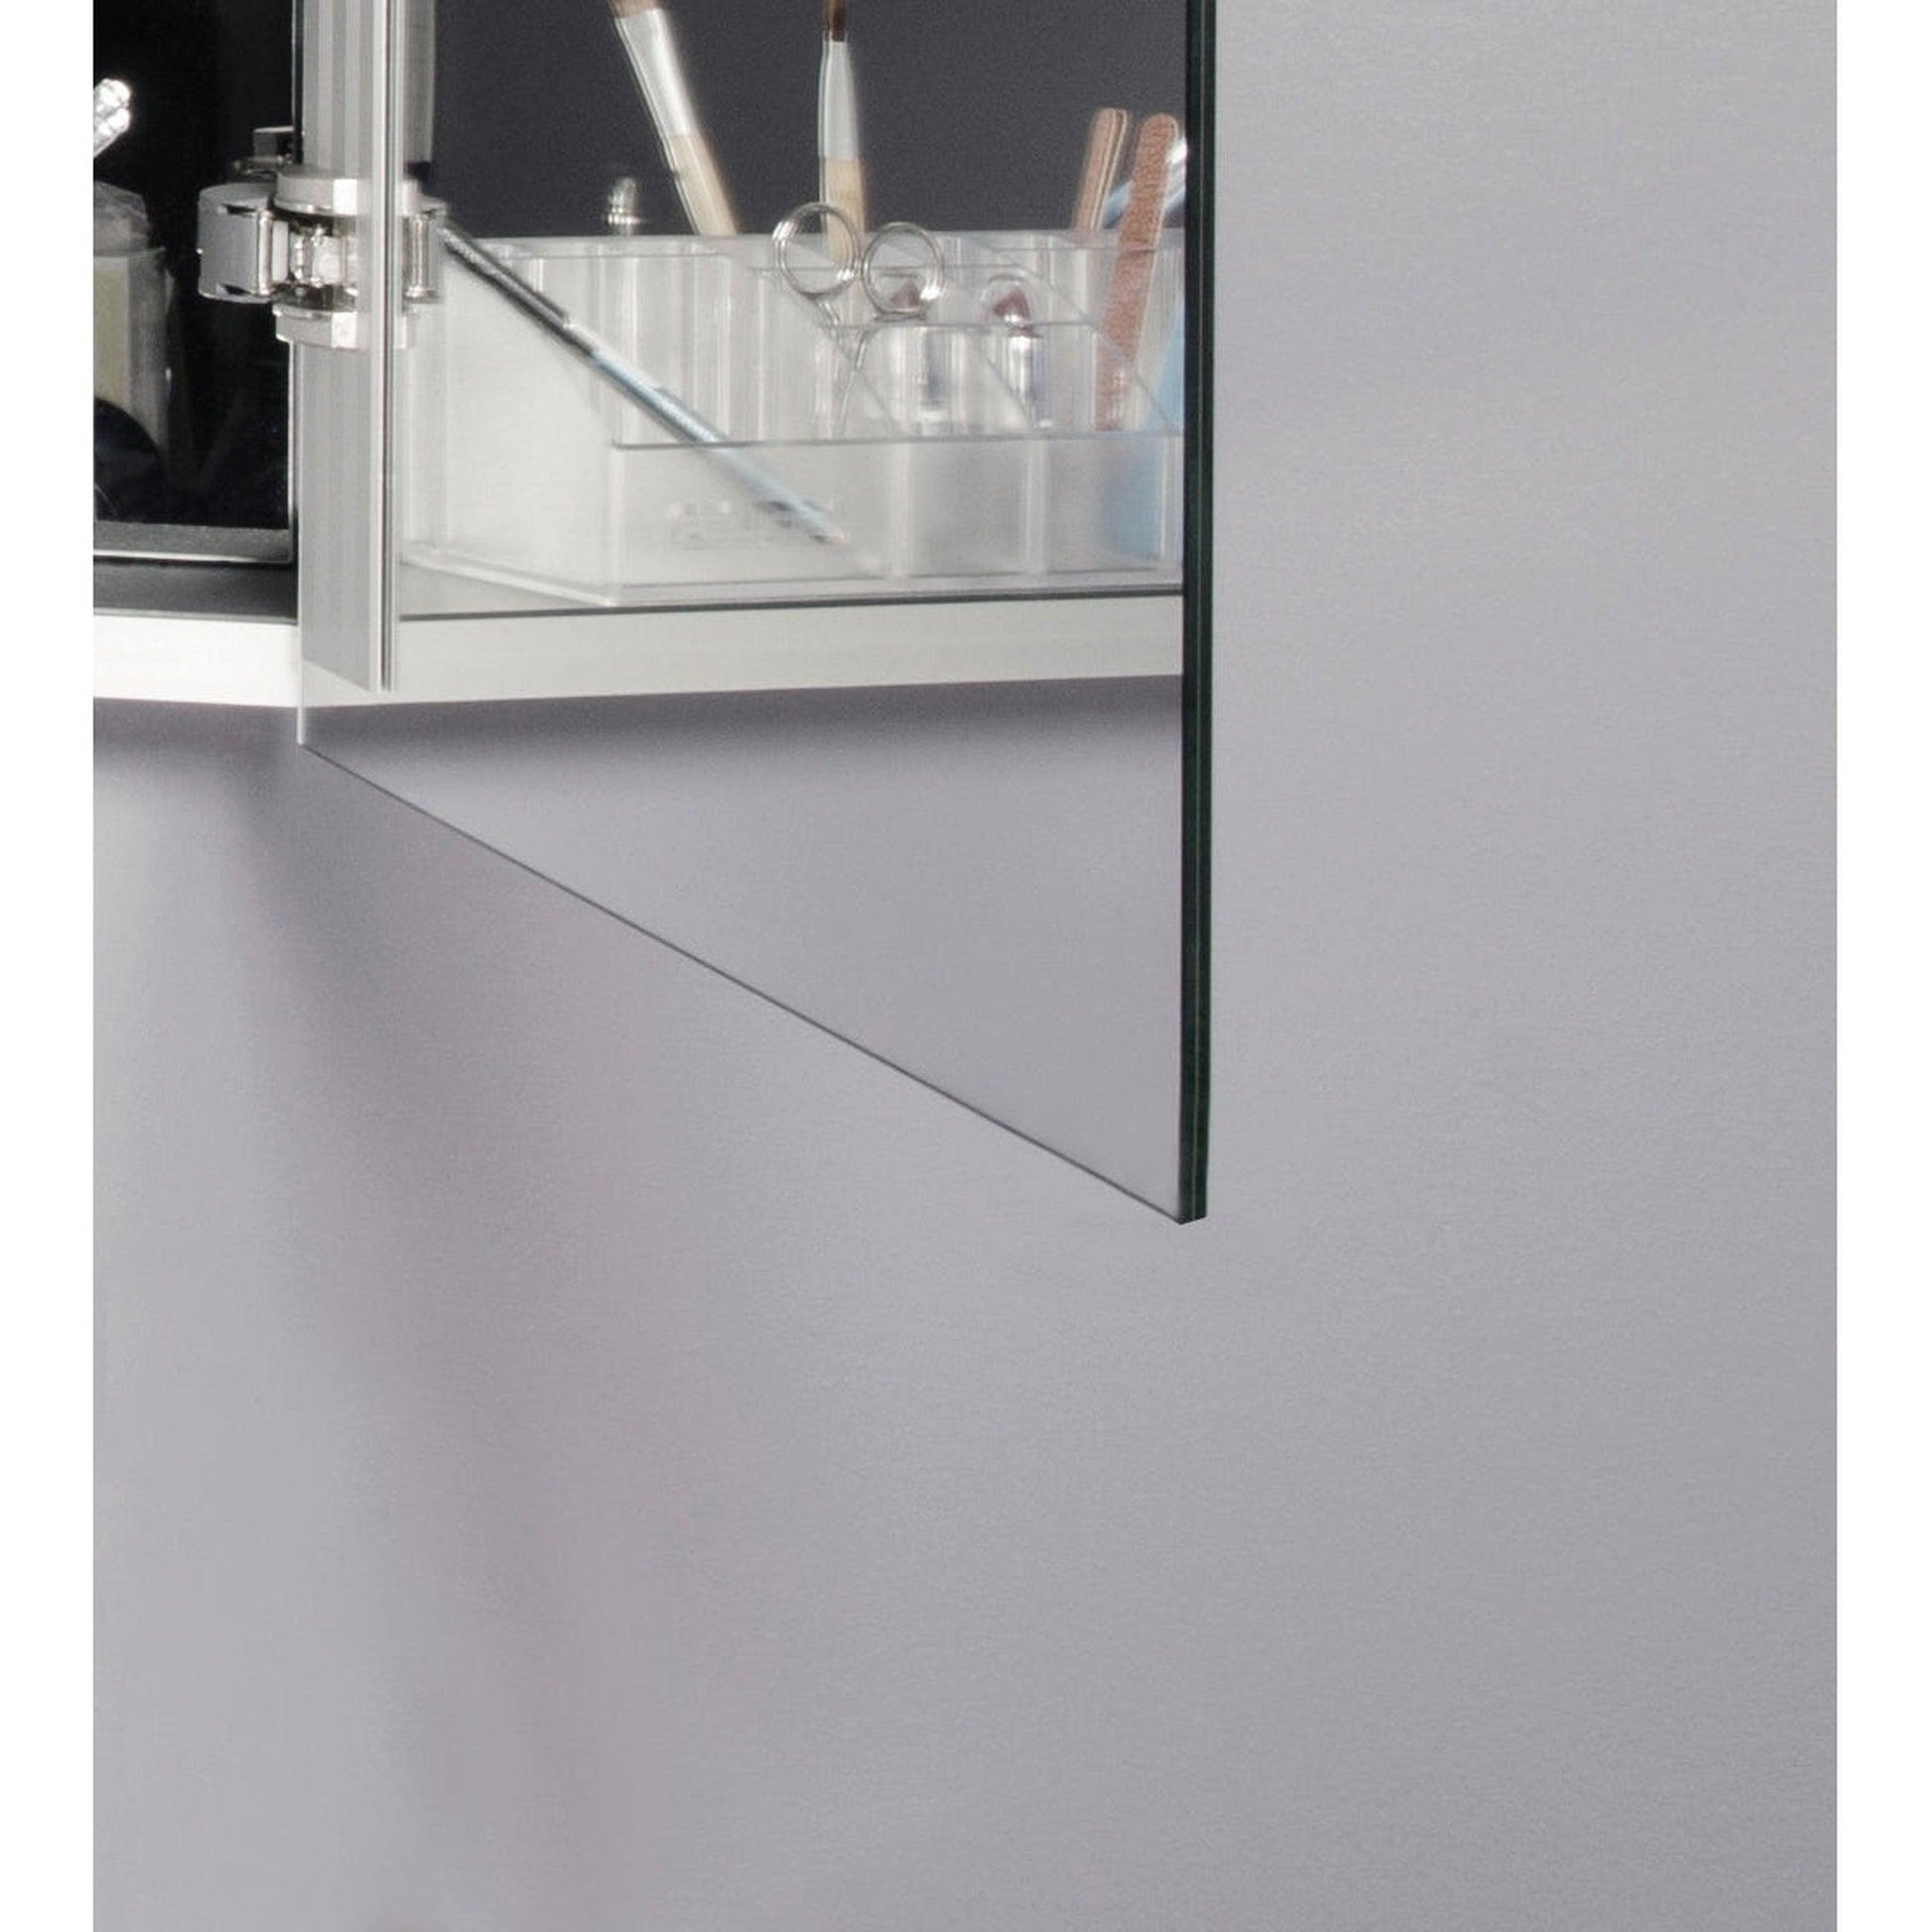 Sidler Xamo 24" x 30" 3000K Single Mirror Left Hinged Door Medicine Cabinet With Built-in GFCI outlet and Night Light Function